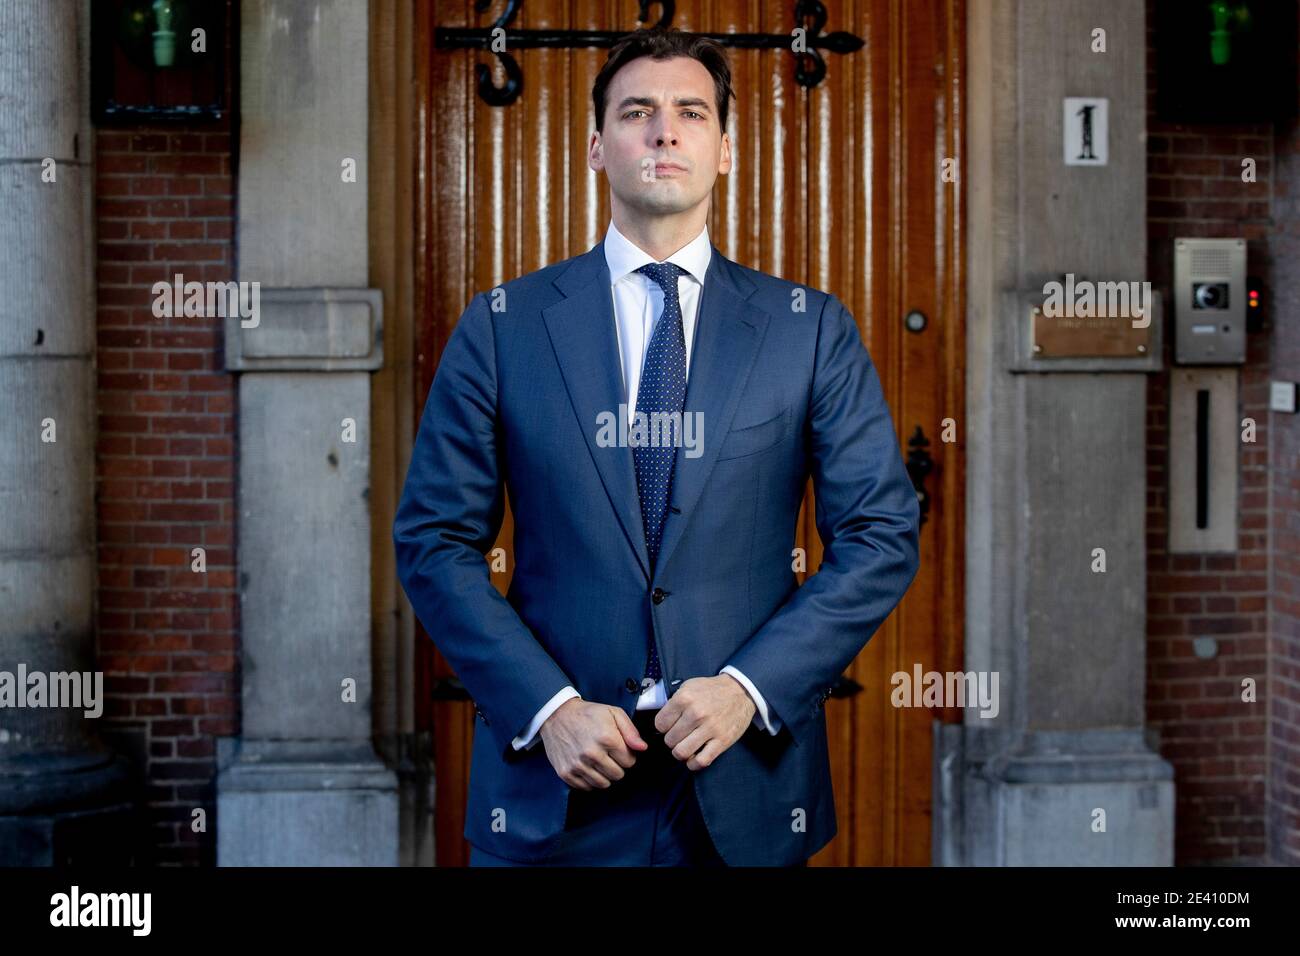 THE HAGUE, NETHERLANDS - JANUARY 21:  Portrait of Thierry Baudet, political leader of Forum voor Democratie (FVD) on January 21, 2021 in The Hague, NE Stock Photo